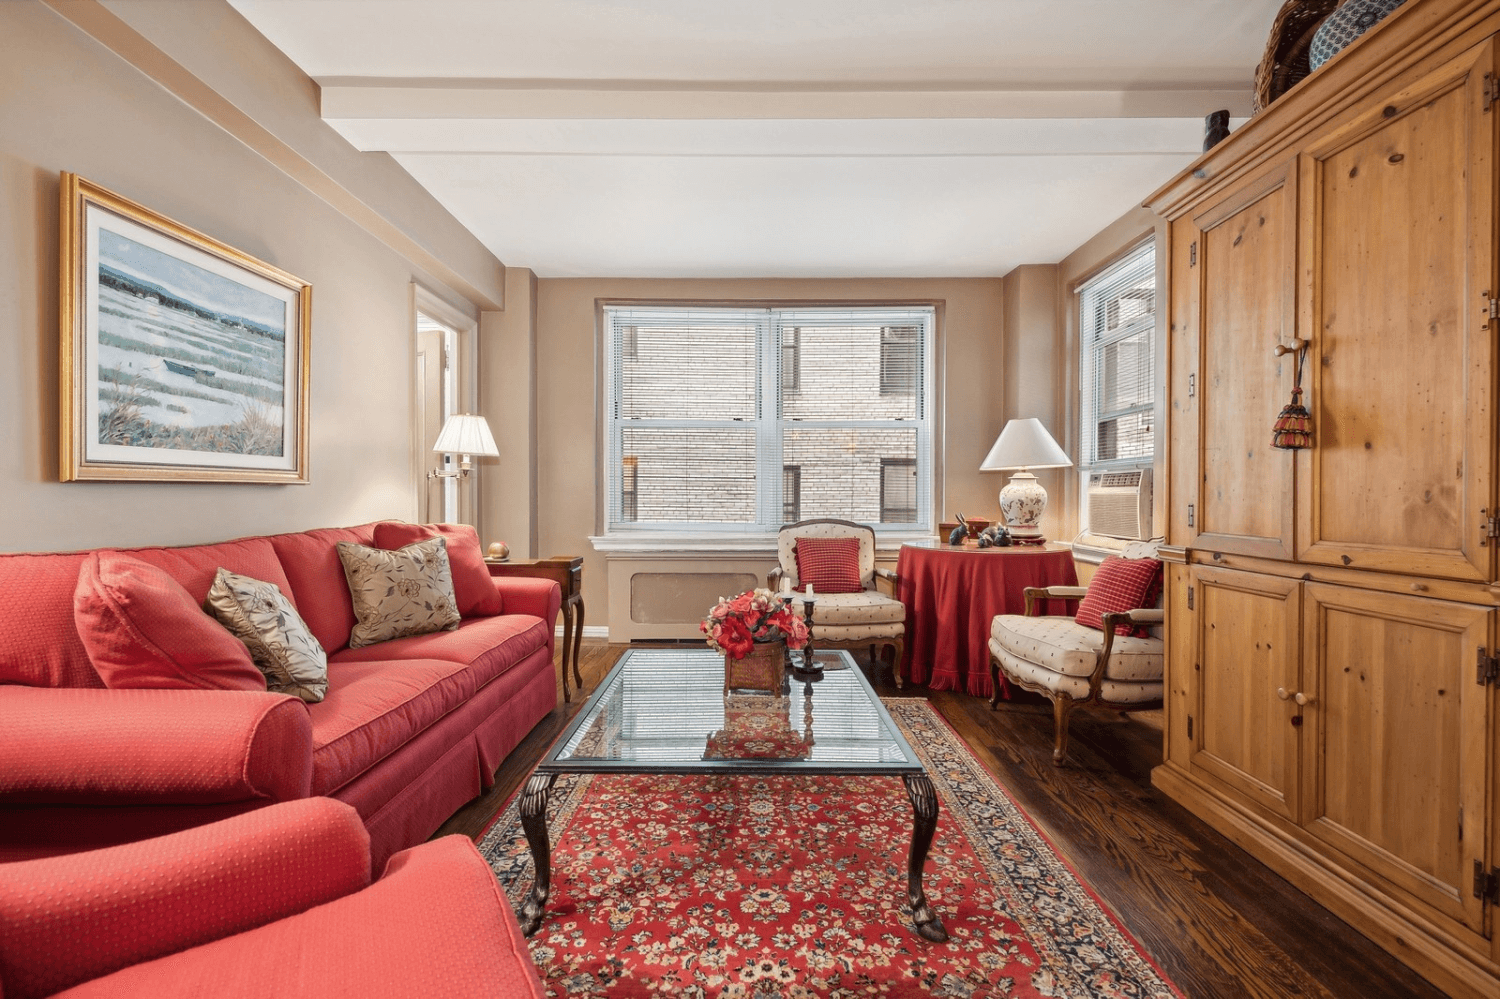 The largest of the Eastgate studios, this prewar home boasts a large living area and separate eat in kitchen on a lovely tree lined block just steps off Third Avenue.